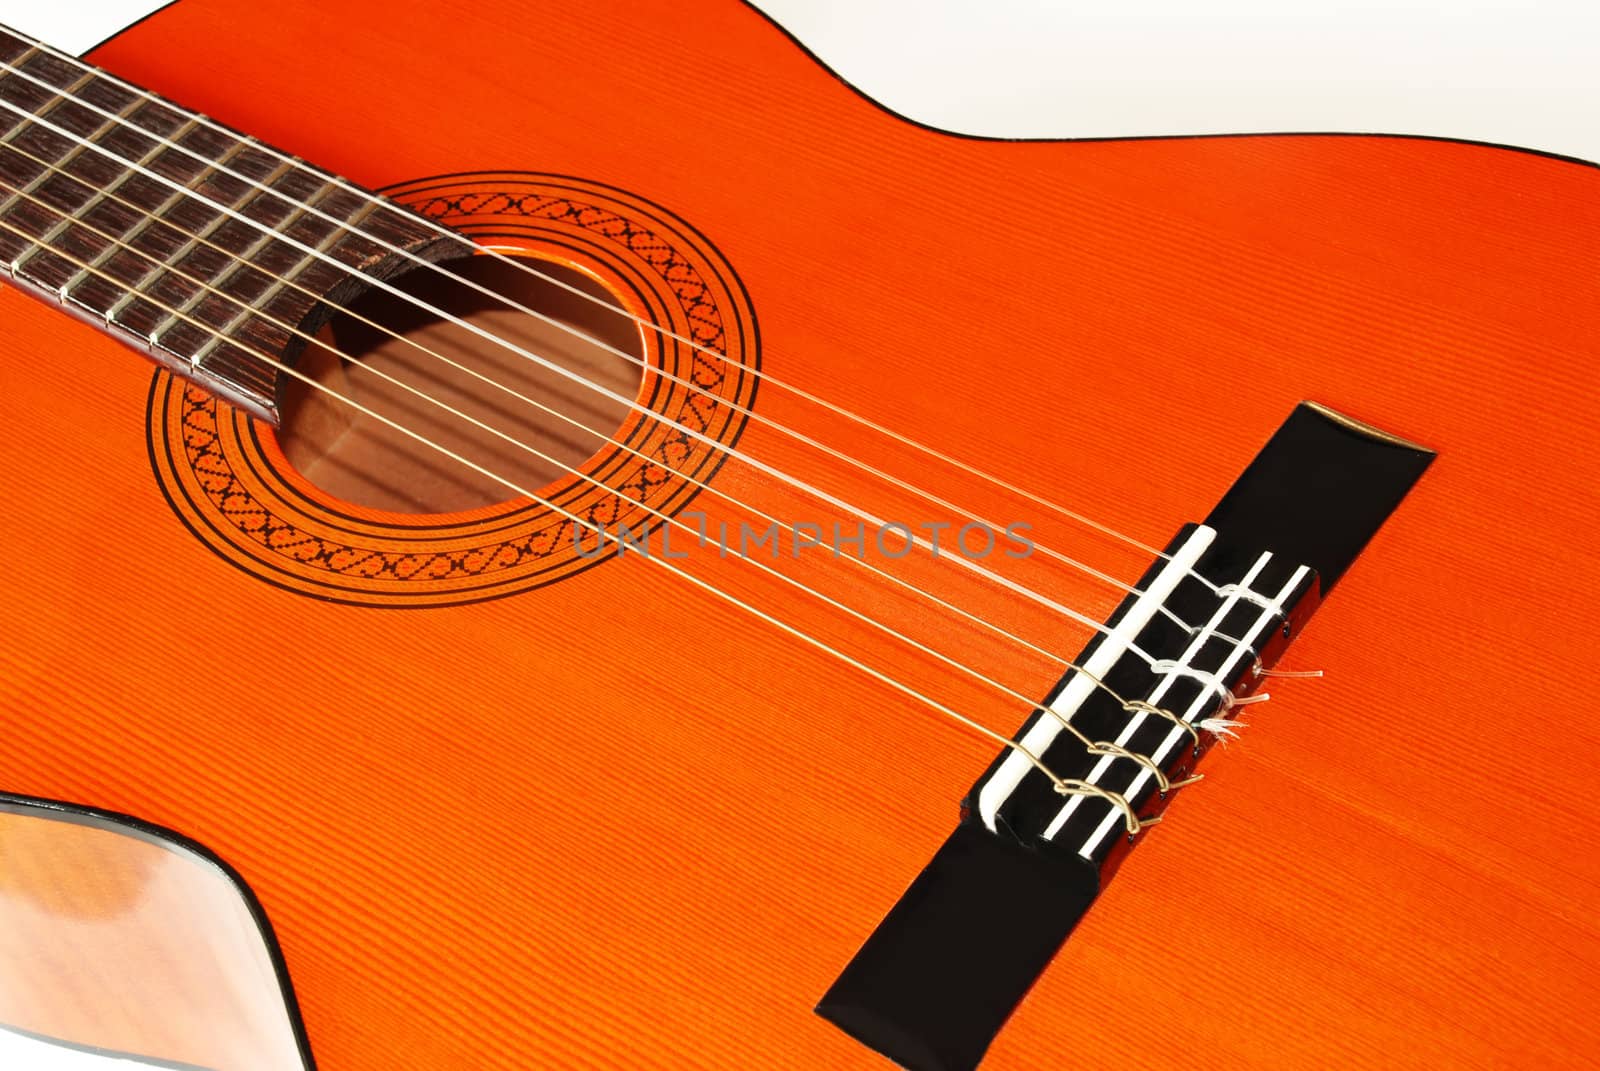 Acoustical guitar by simply